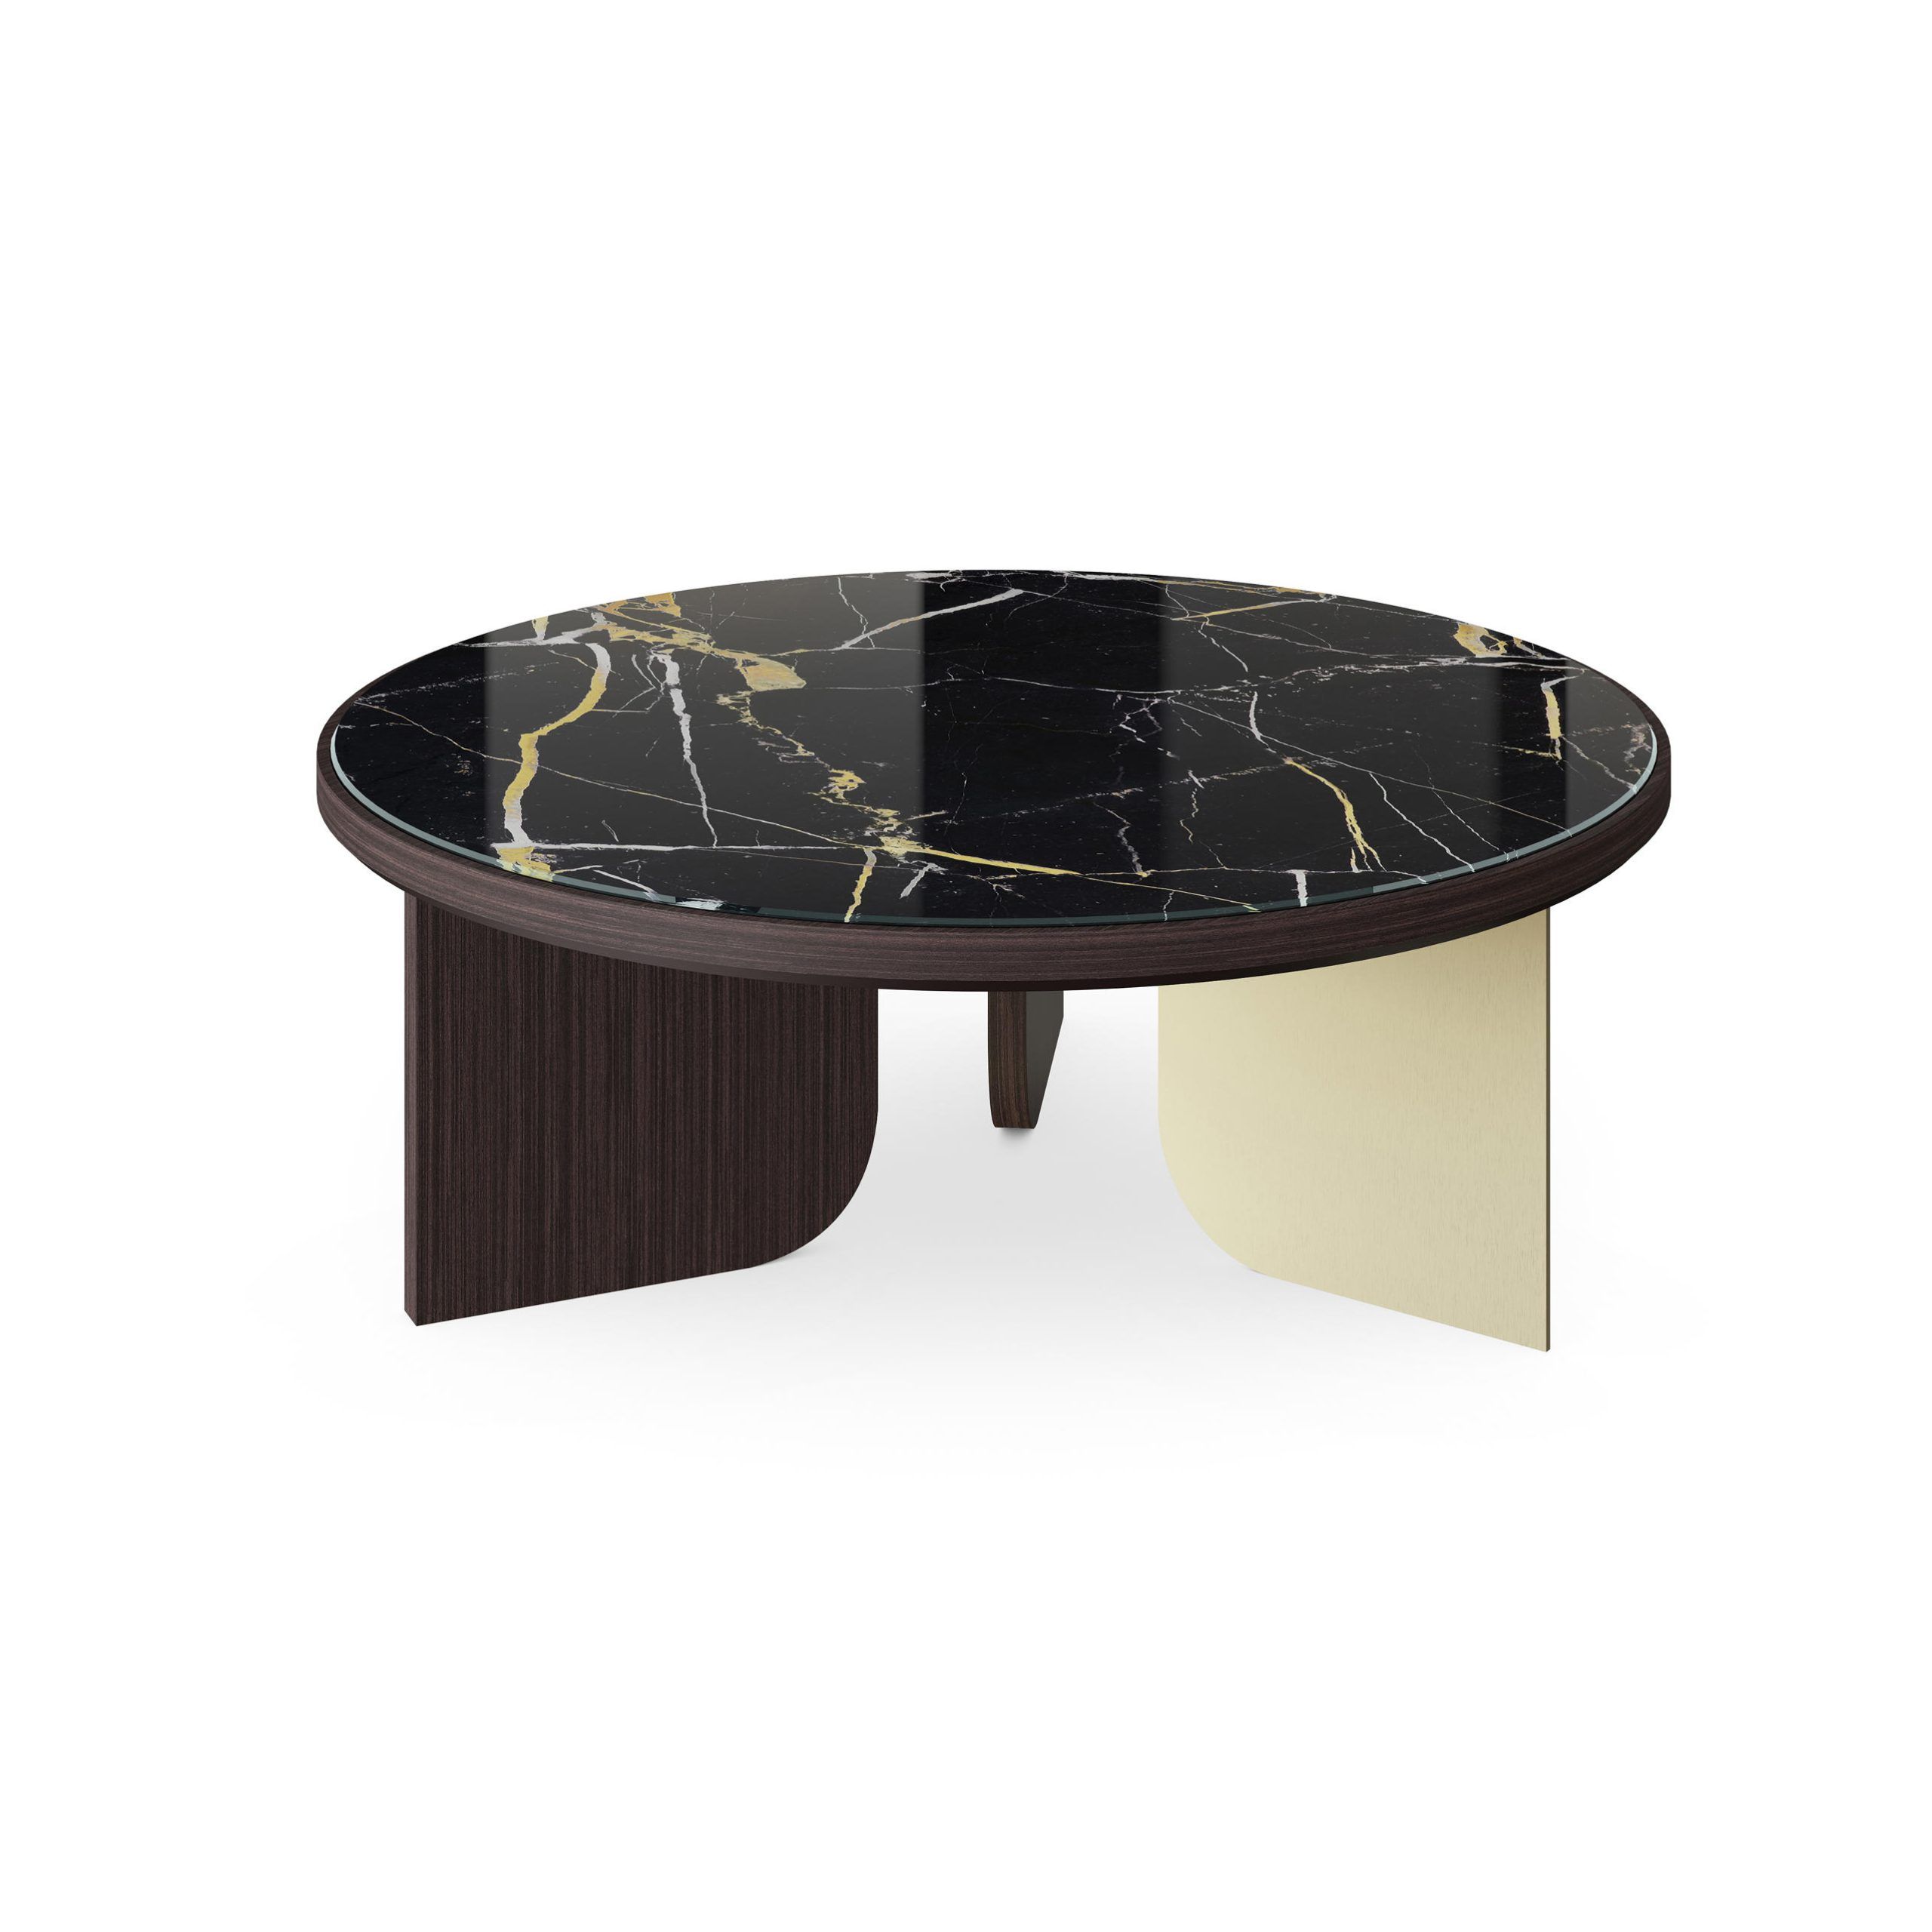 Liam Coffee Table & Designer Furniture | Architonic Within Liam Round Plaster Coffee Tables (View 14 of 20)